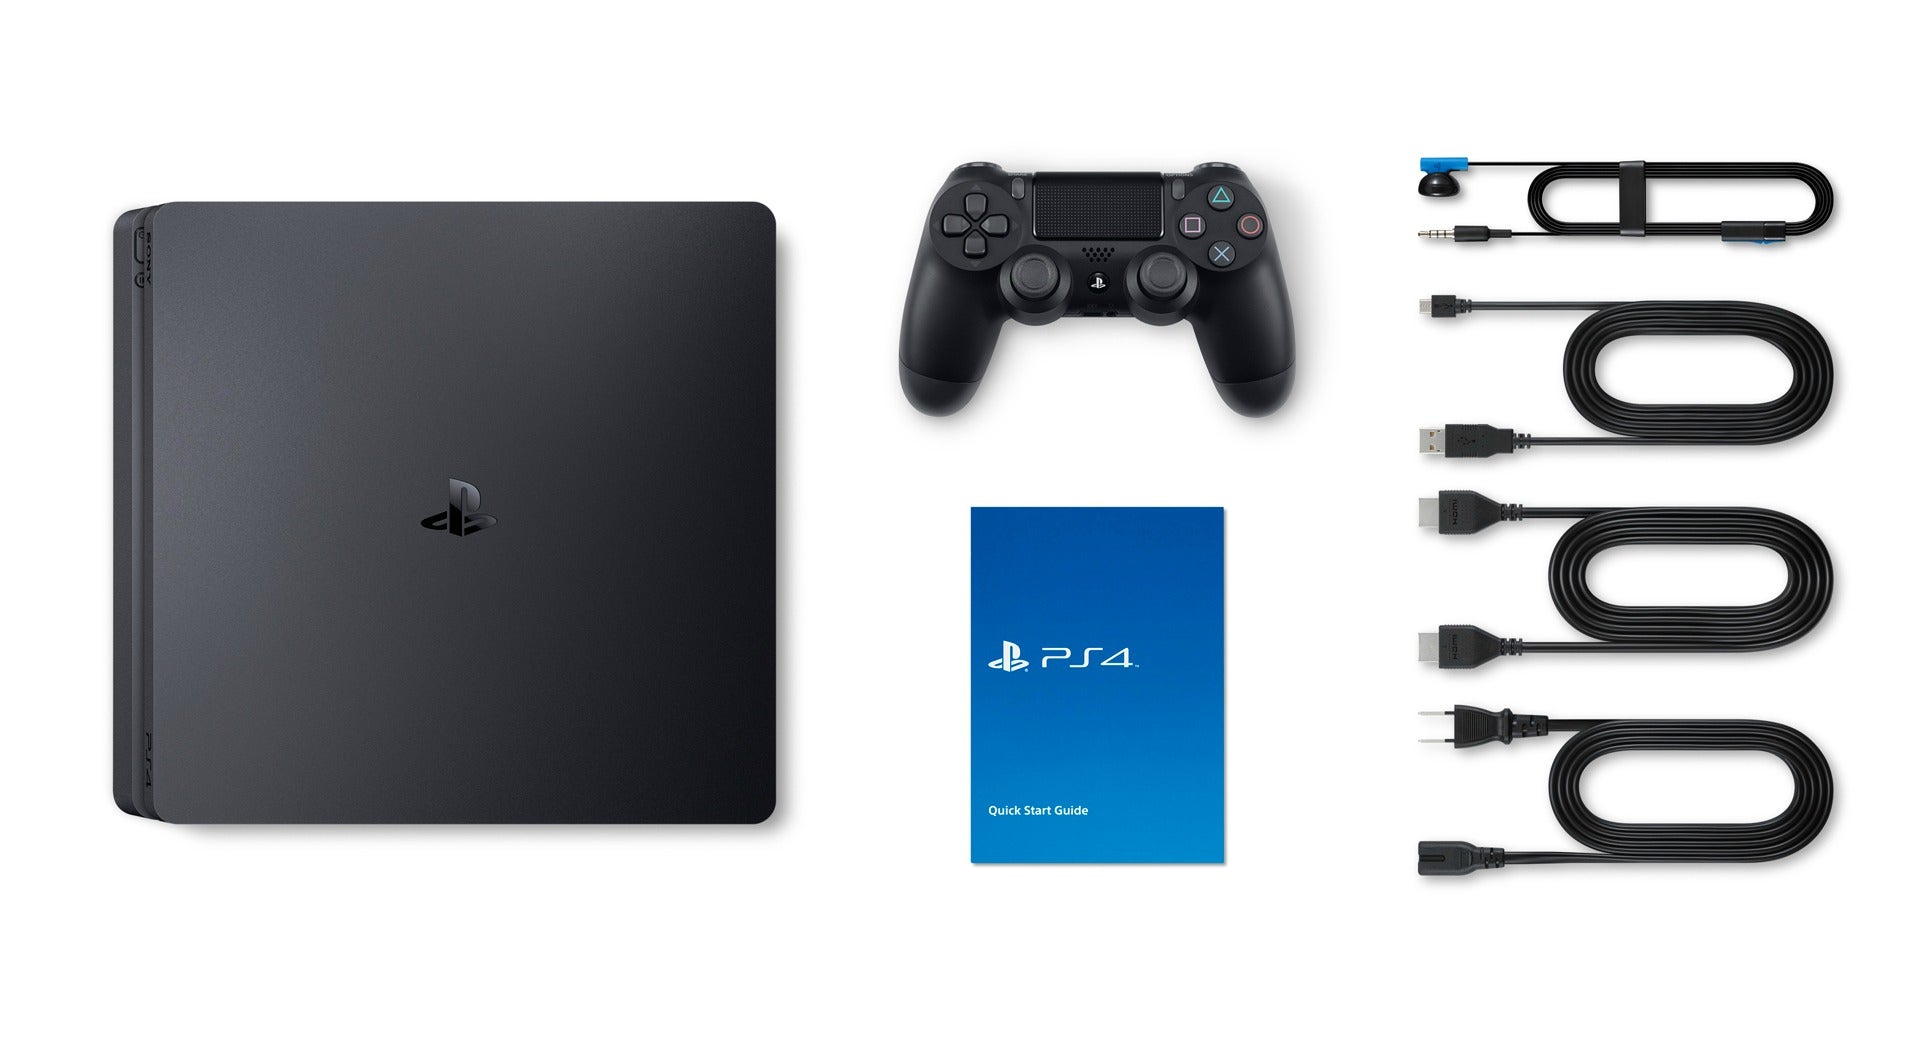 【SALE開催中】 PS4 500GB CUH-2000A 家庭用ゲーム本体